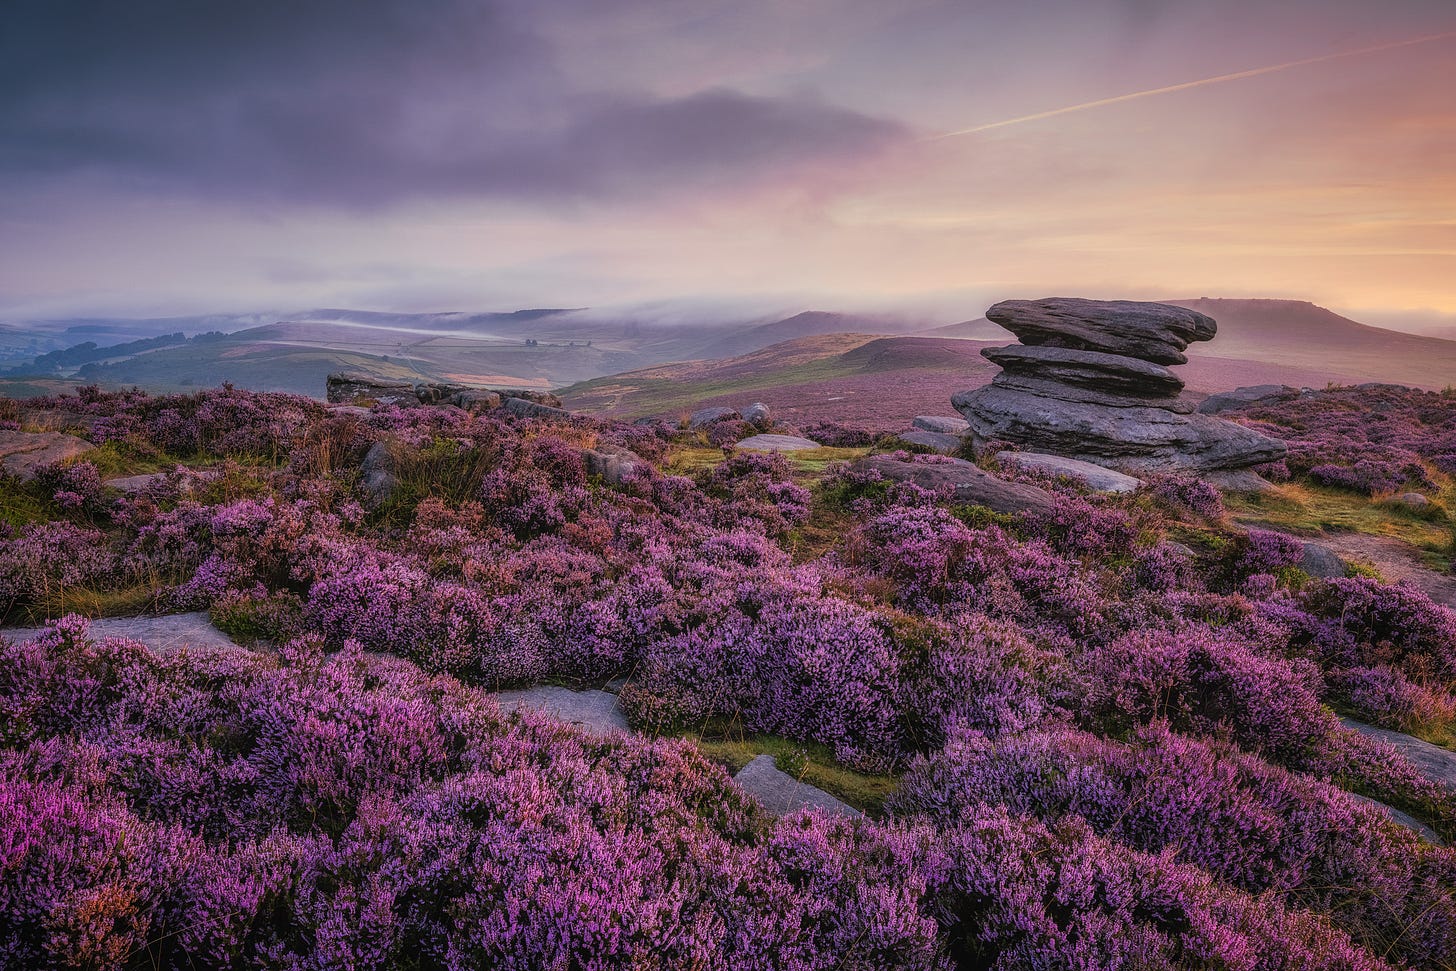 Millstone Edge in the Peak District covered in purple heather and lit by the colours of dawn in the sky above